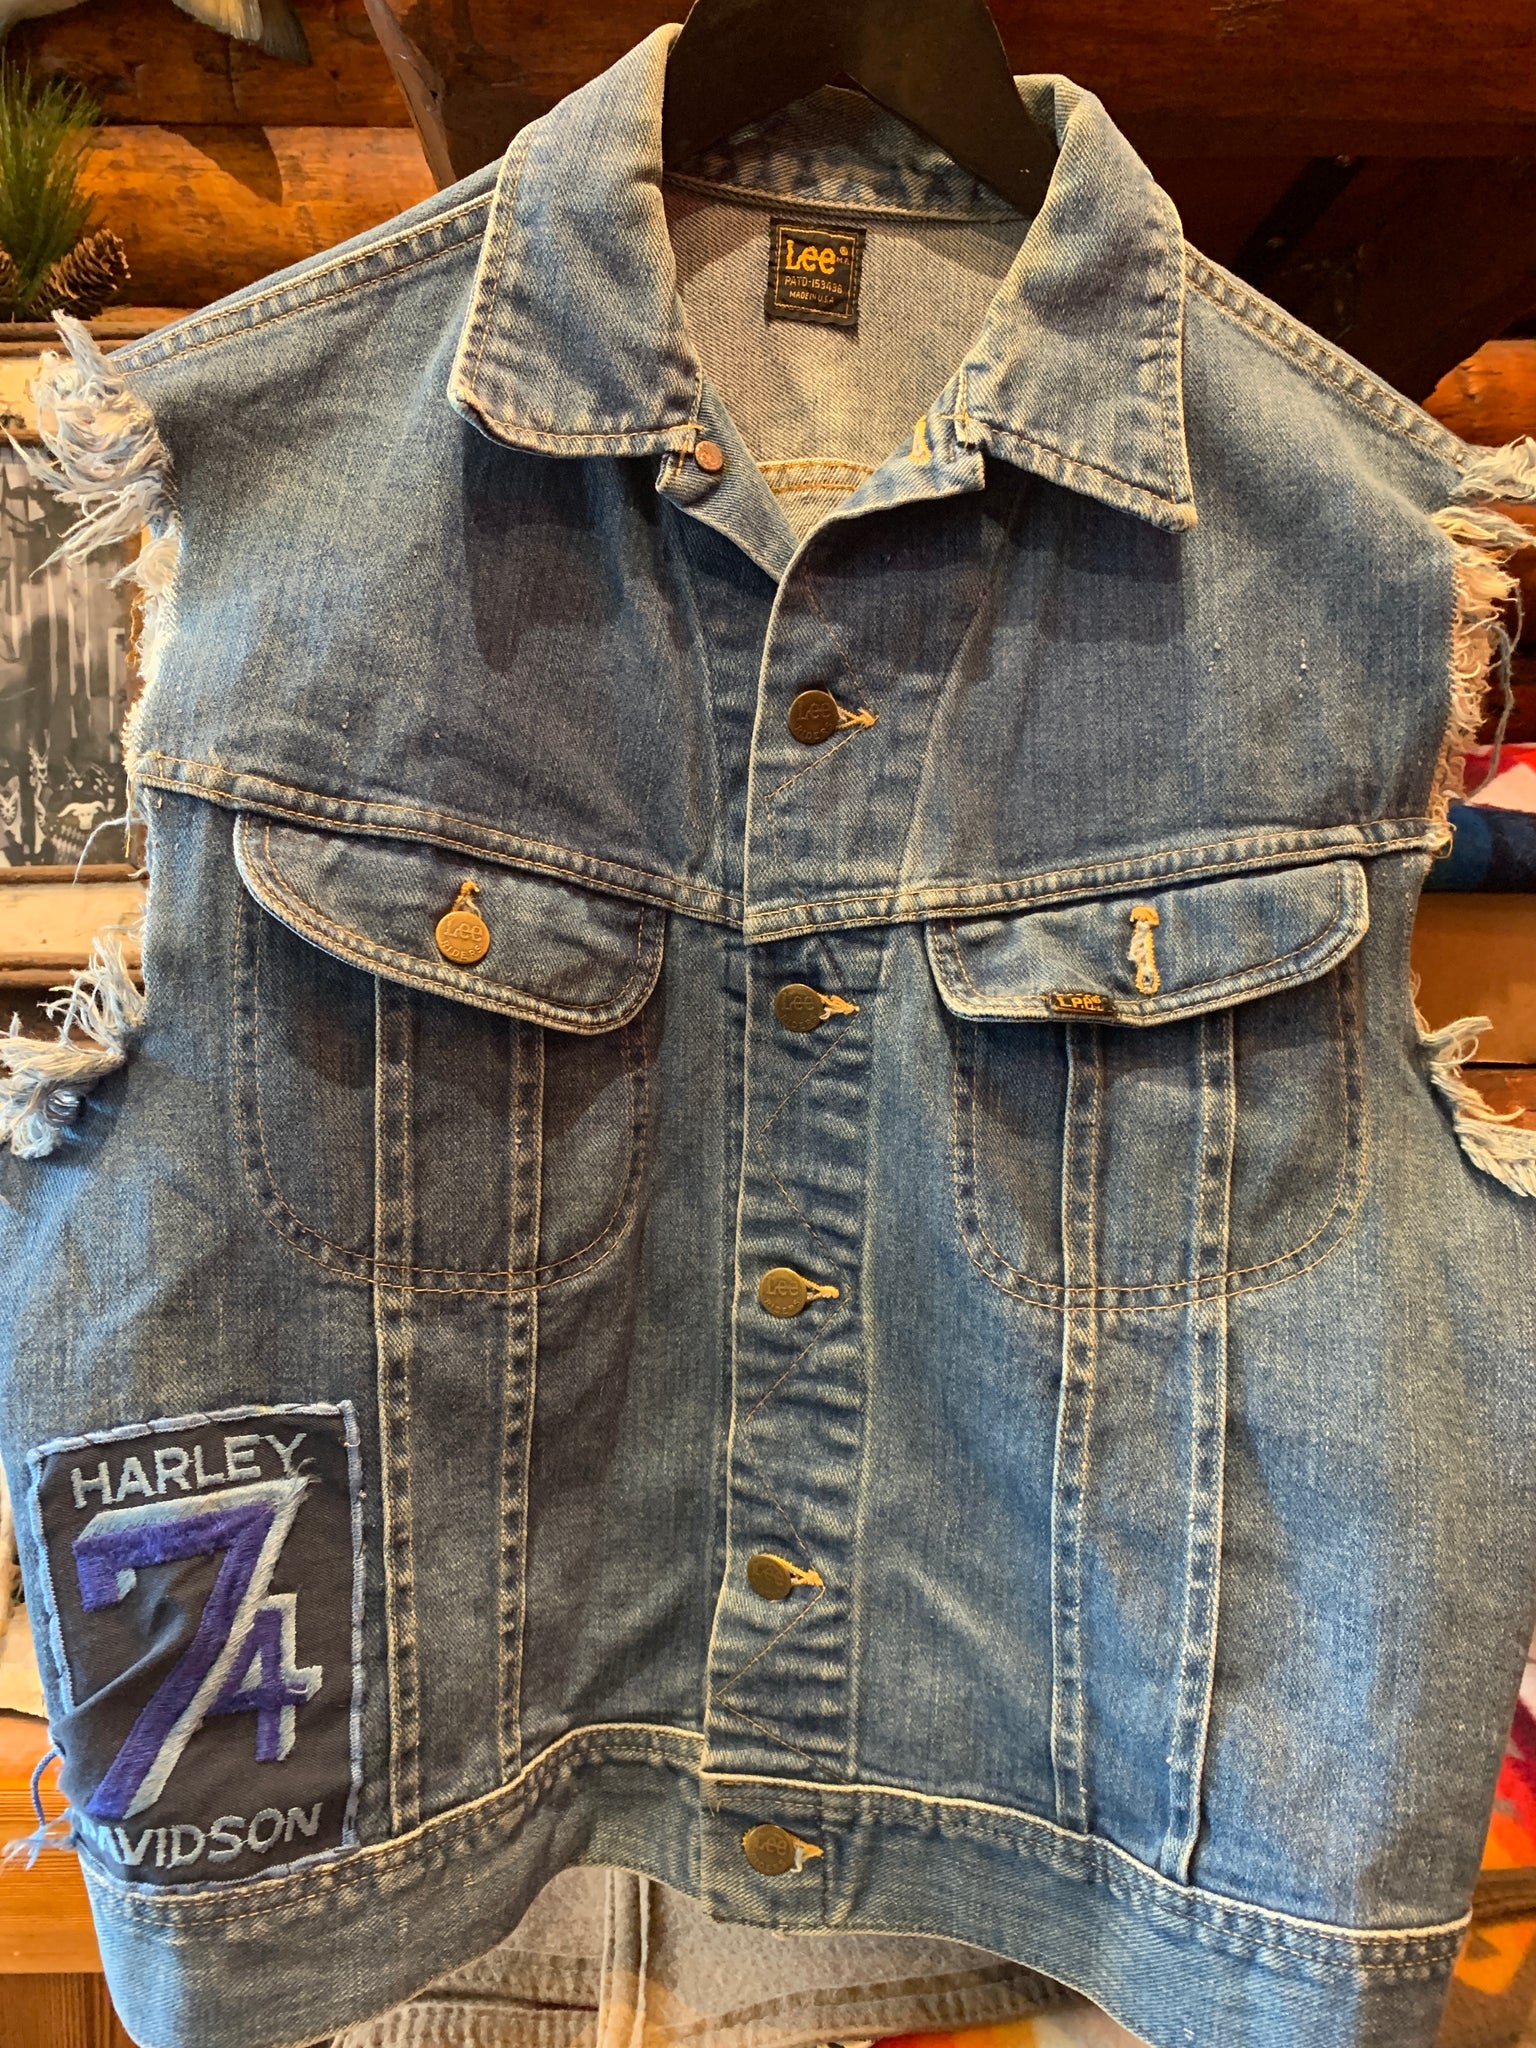 Rare Vintage Jean Jacket with Tons of Harley Davidson Patches